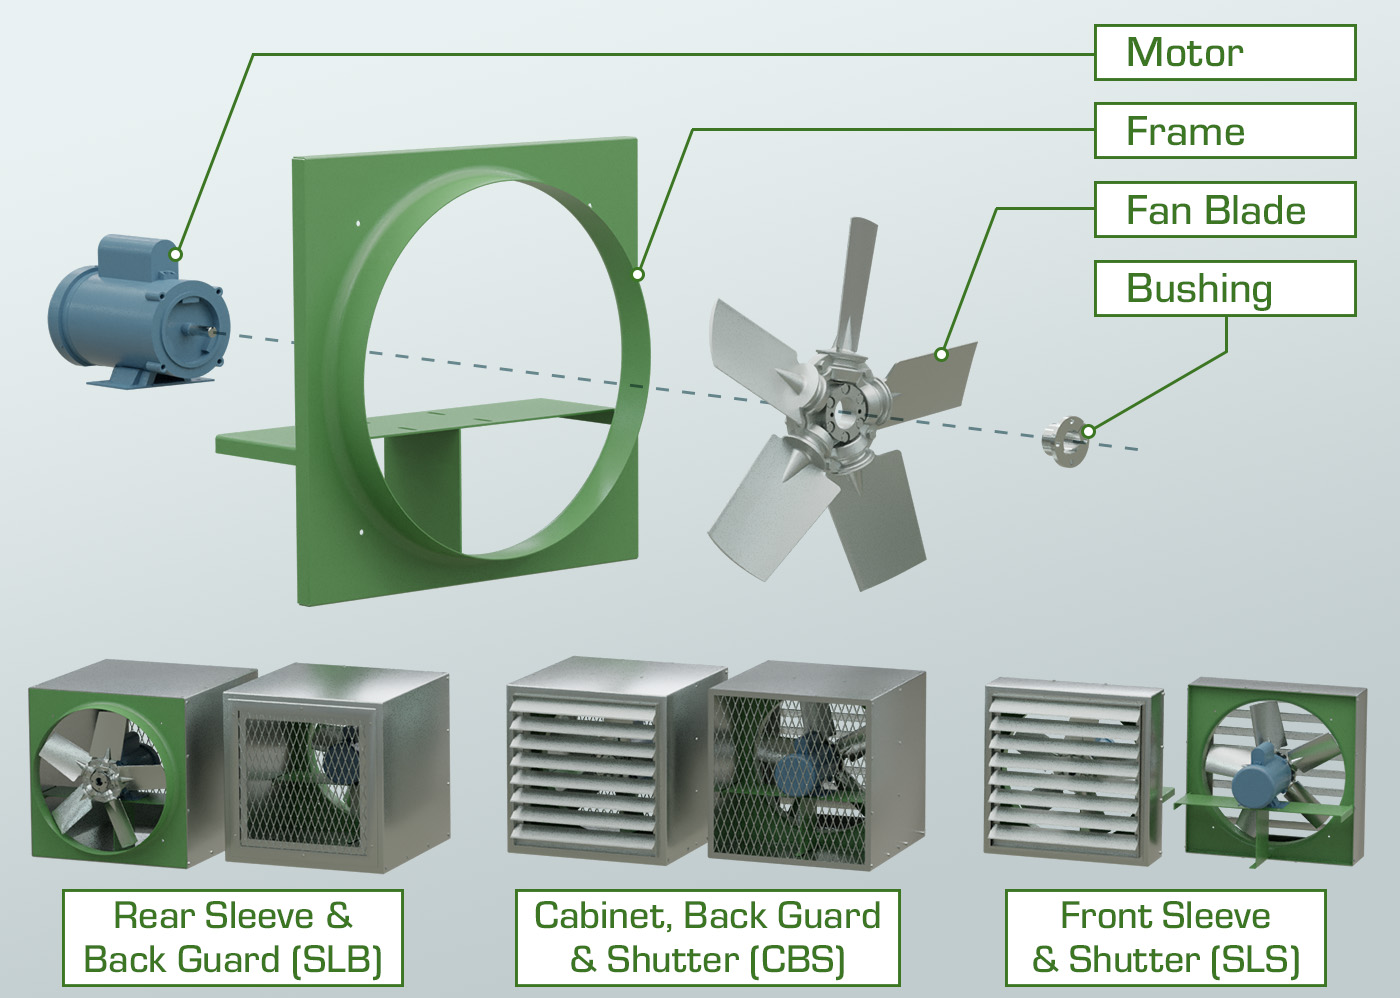 Exploded view of an ADD fan with motor, frame, fan blade and bushing, as well as configurations for rear sleeve & back guard (SLB); cabinet, back guard & shutter (CBS); front sleeve & shutter (SLS).